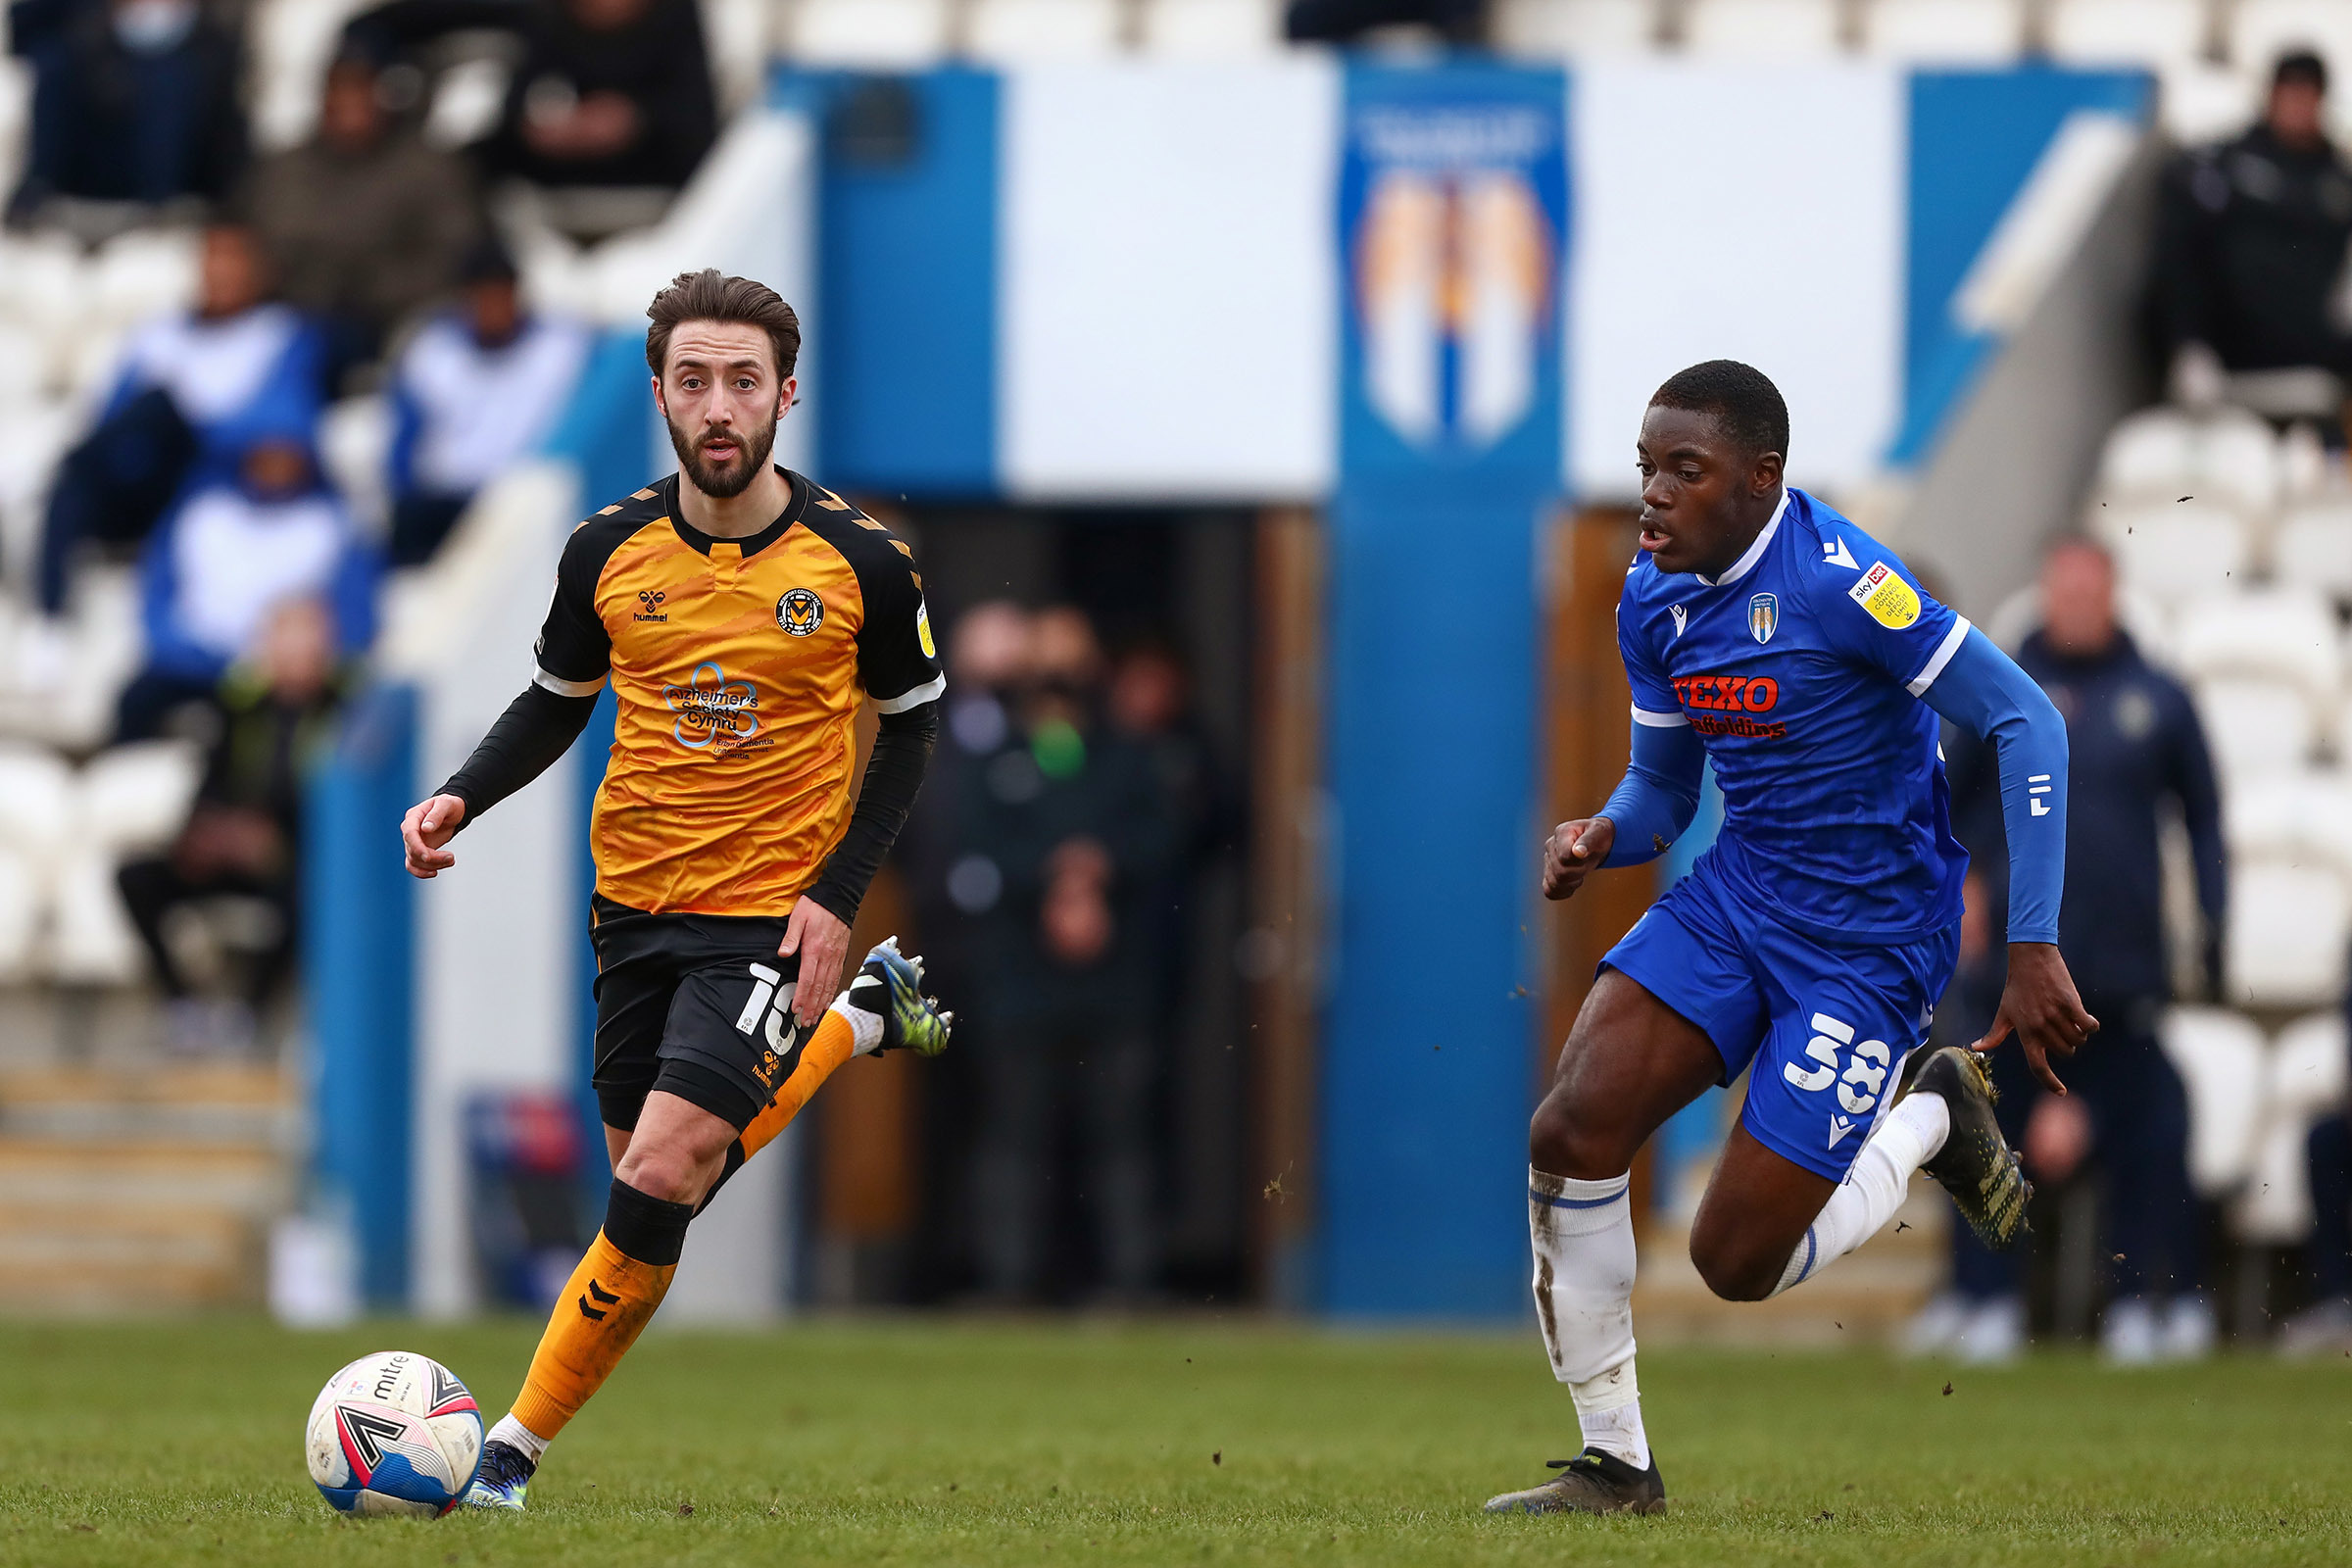 06.03.21 - Colchester United v Newport County - Sky Bet League 2 - Josh Sheehan of Newport County and Junior Tchamadeu of Colchester United.